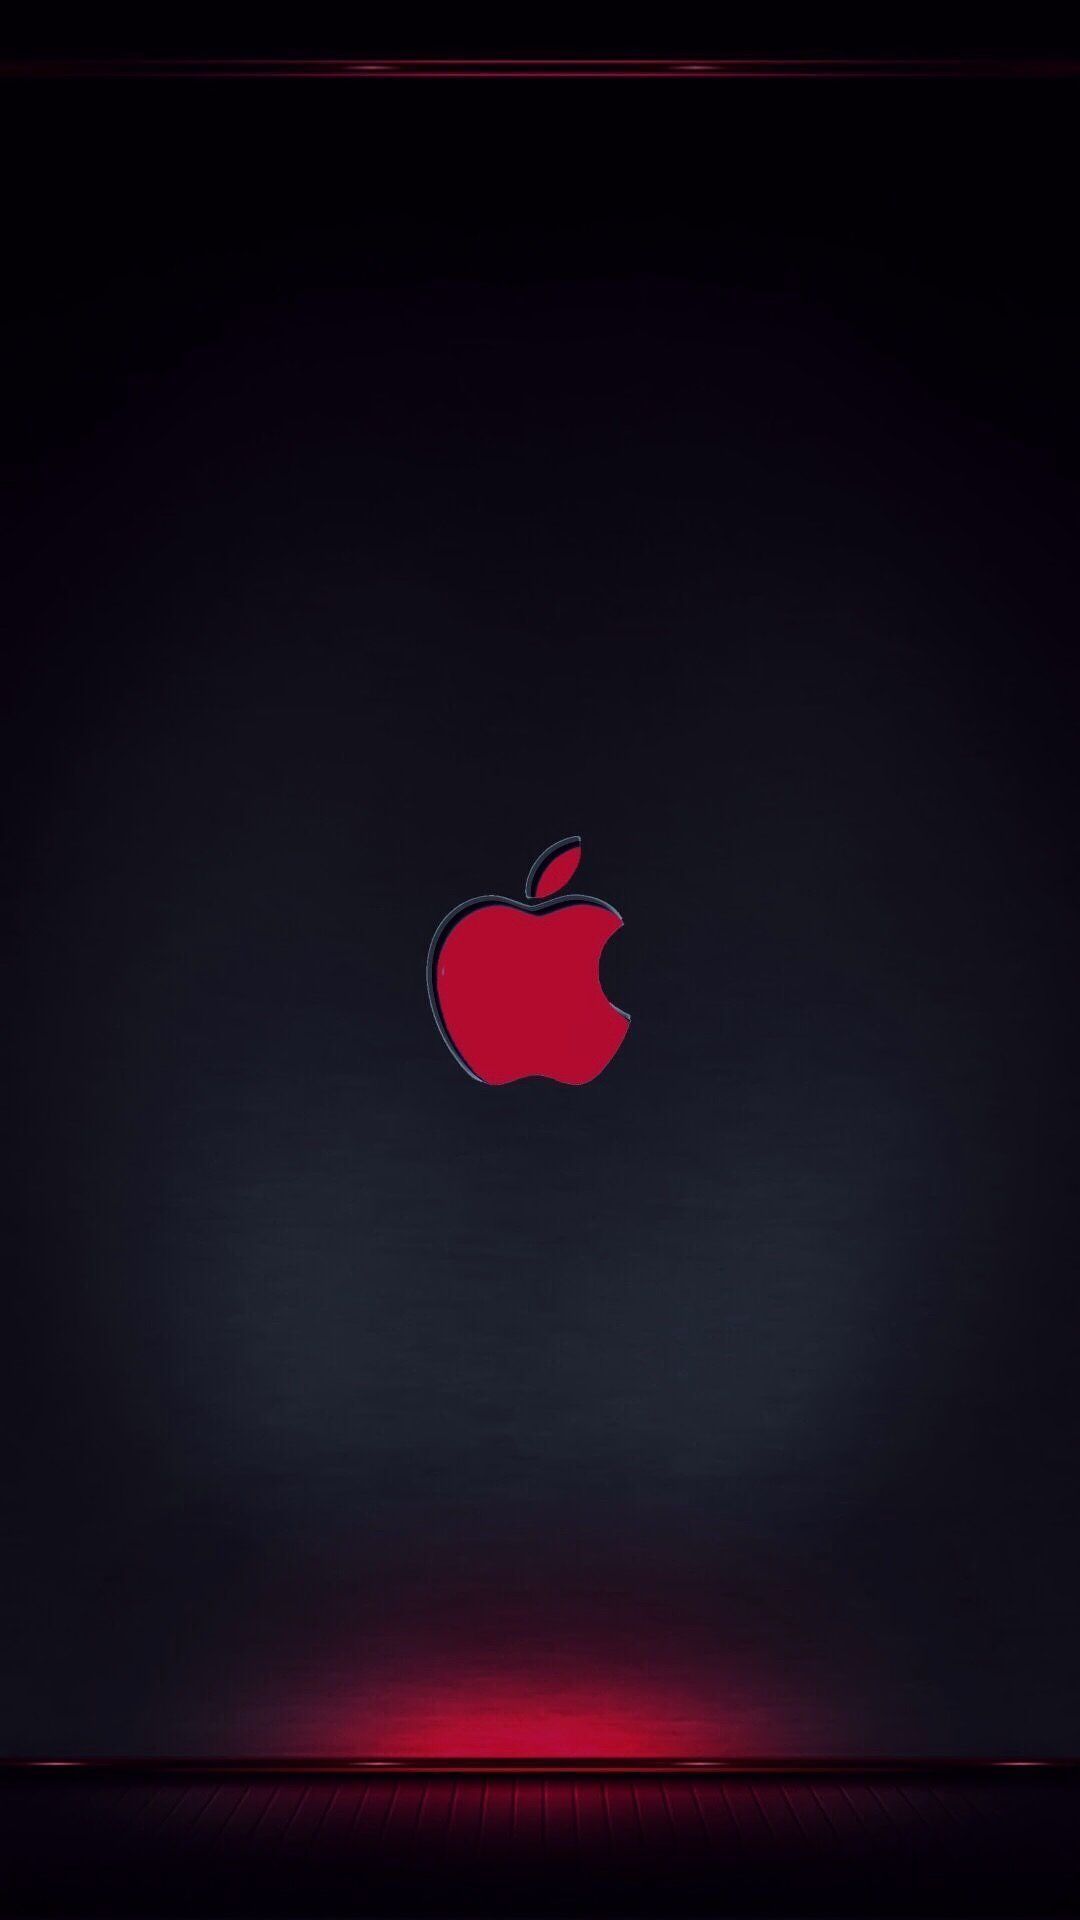 Iphone apple logo wallpapers iphone pro max iphone iphone wallpaper ipad mac apple logo wallpaper iphone apple wallpaper apple picture